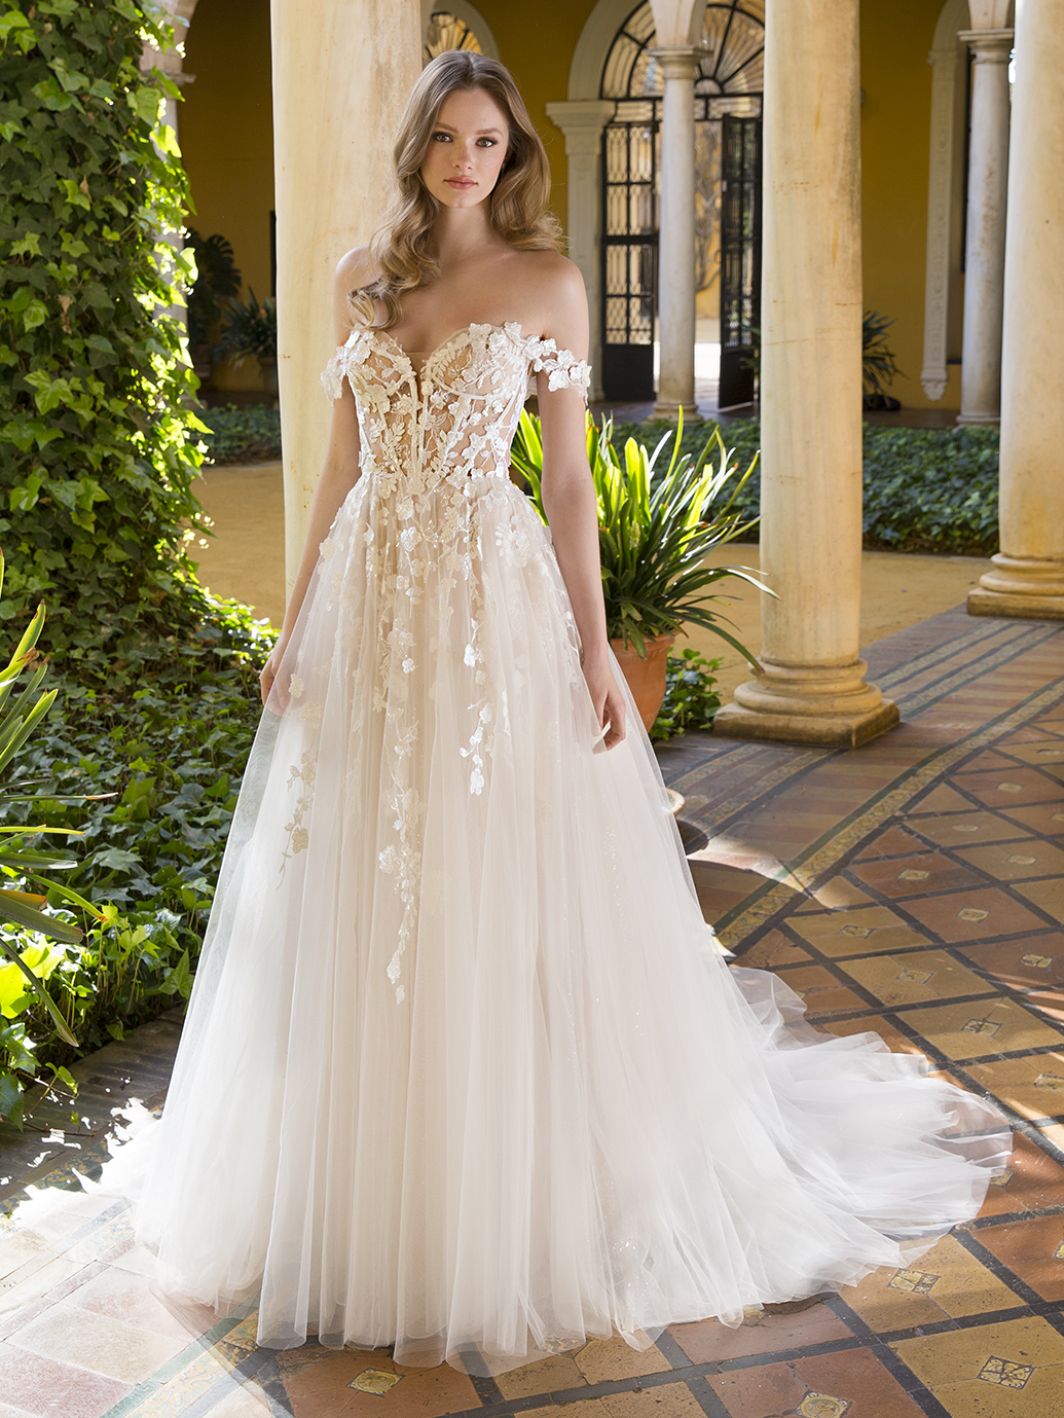 Sweetheart Corset Bodice A-Line Gown Palmer by Enzoani at K&B Bridals bridal shop near baltimore maryland